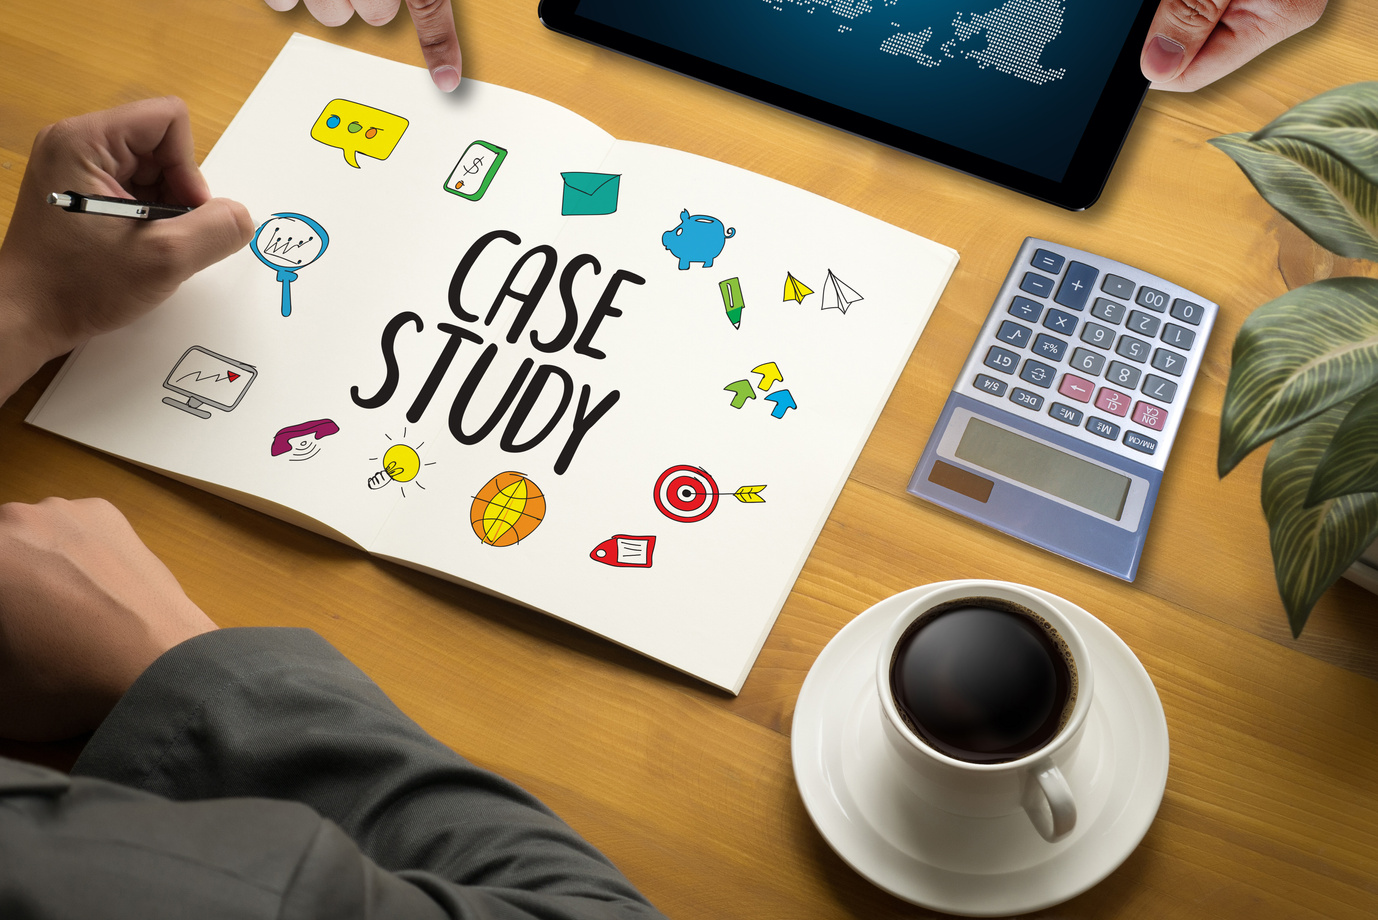 CASE STUDY Student Studying Hard and Students Learning Education Diverse People  Campus